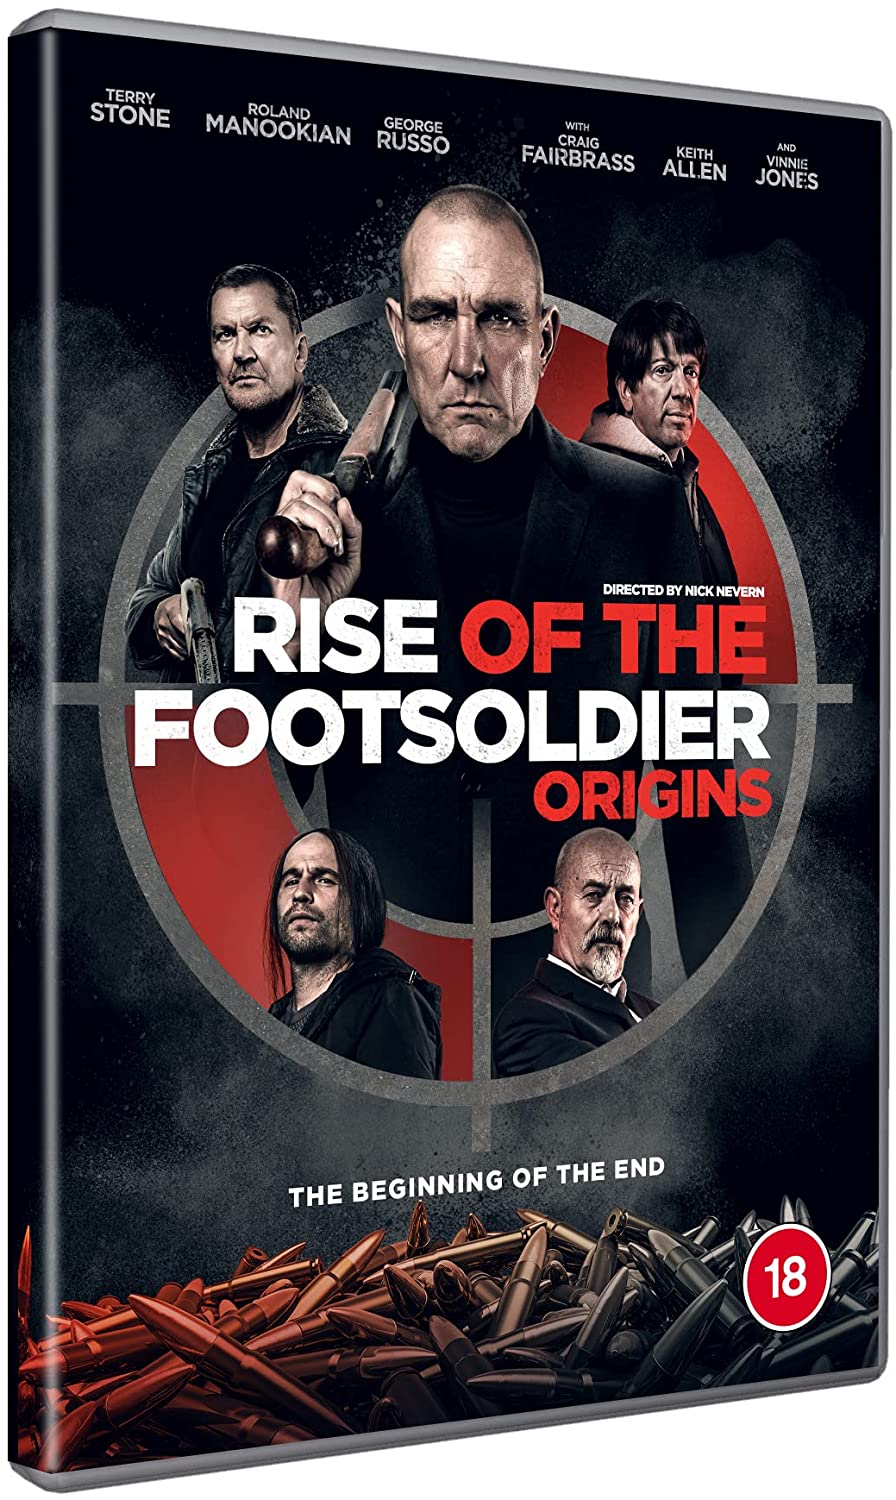 Rise of the Footsoldier: Origins  [2021] - Crime/Drama  [DVD]